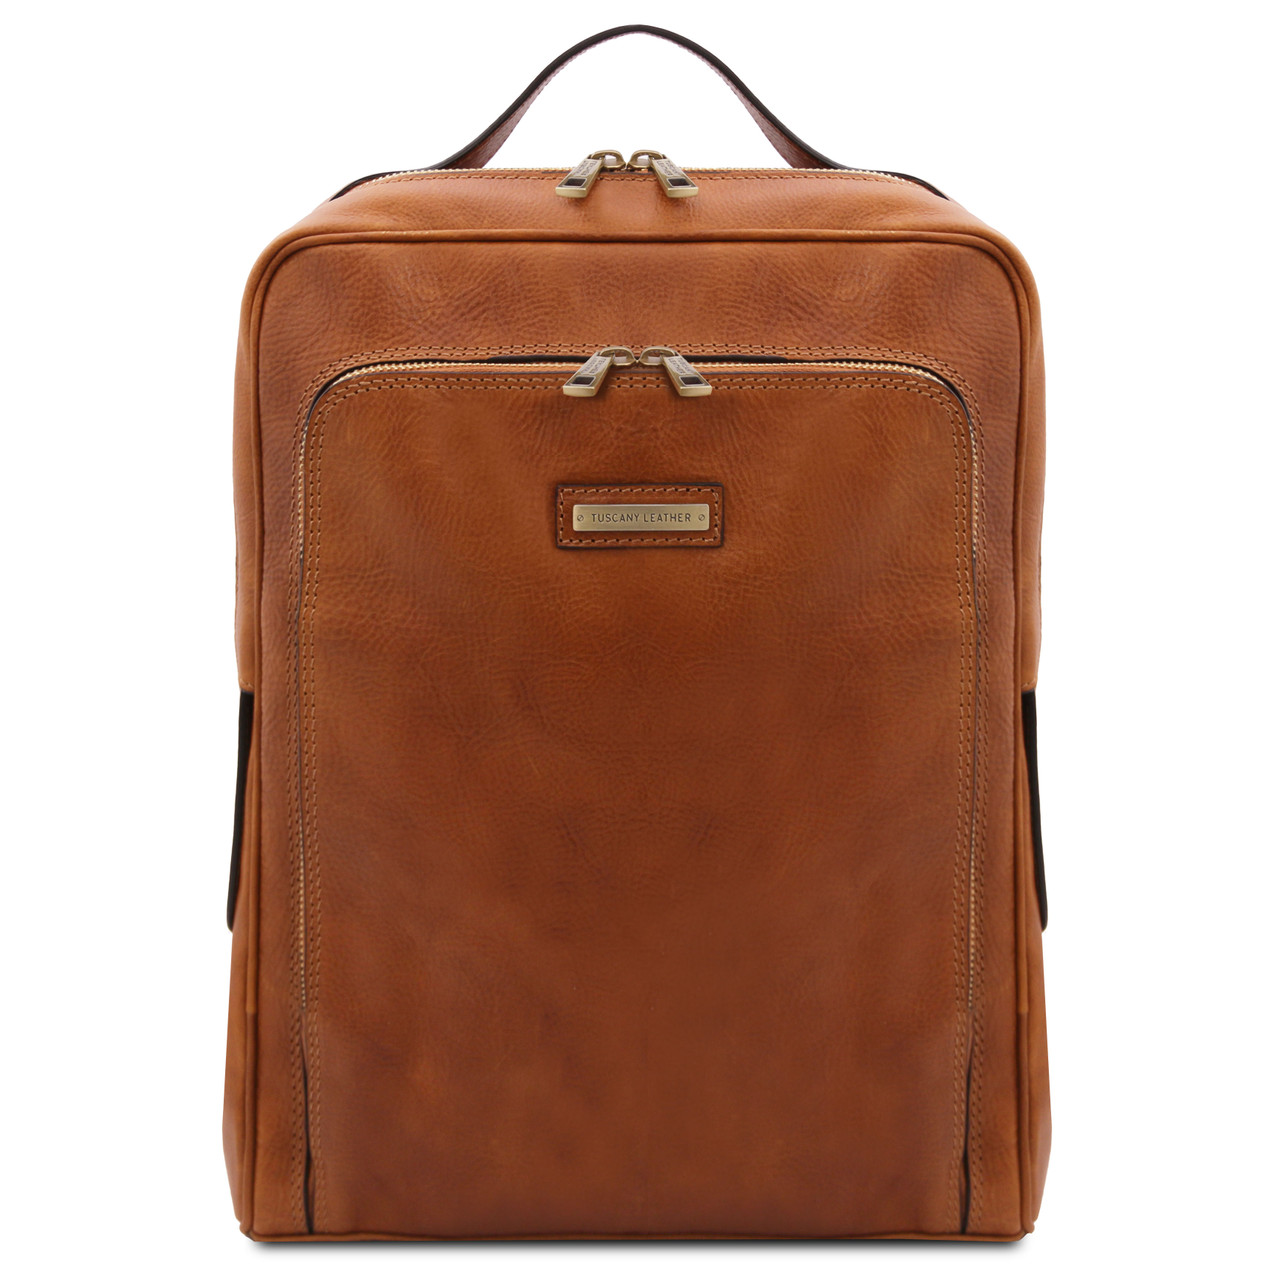 Tuscany Leather Bangkok Laptop Backpack Small at Luggage Superstore